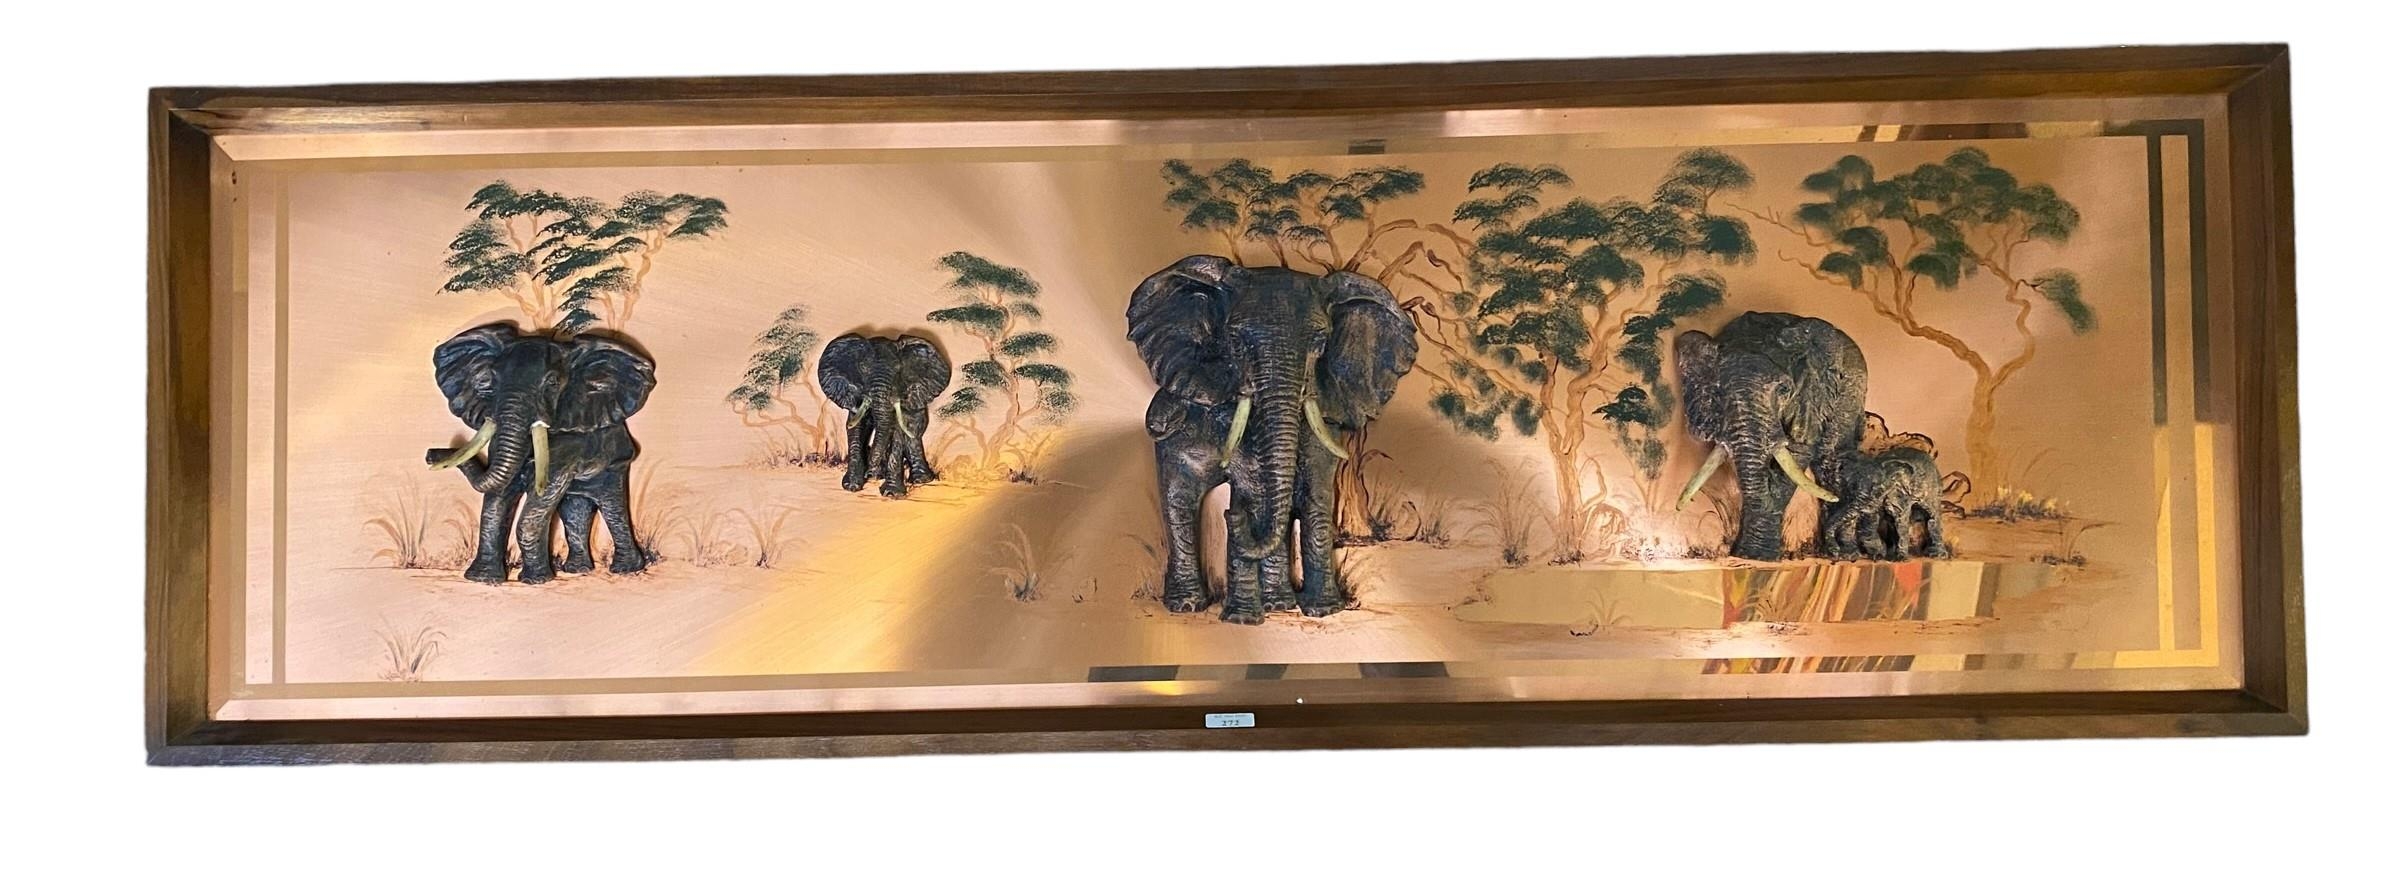 A wooden framed wall panel of elephants, signed Rangal, the sculptures of the elephants raised on